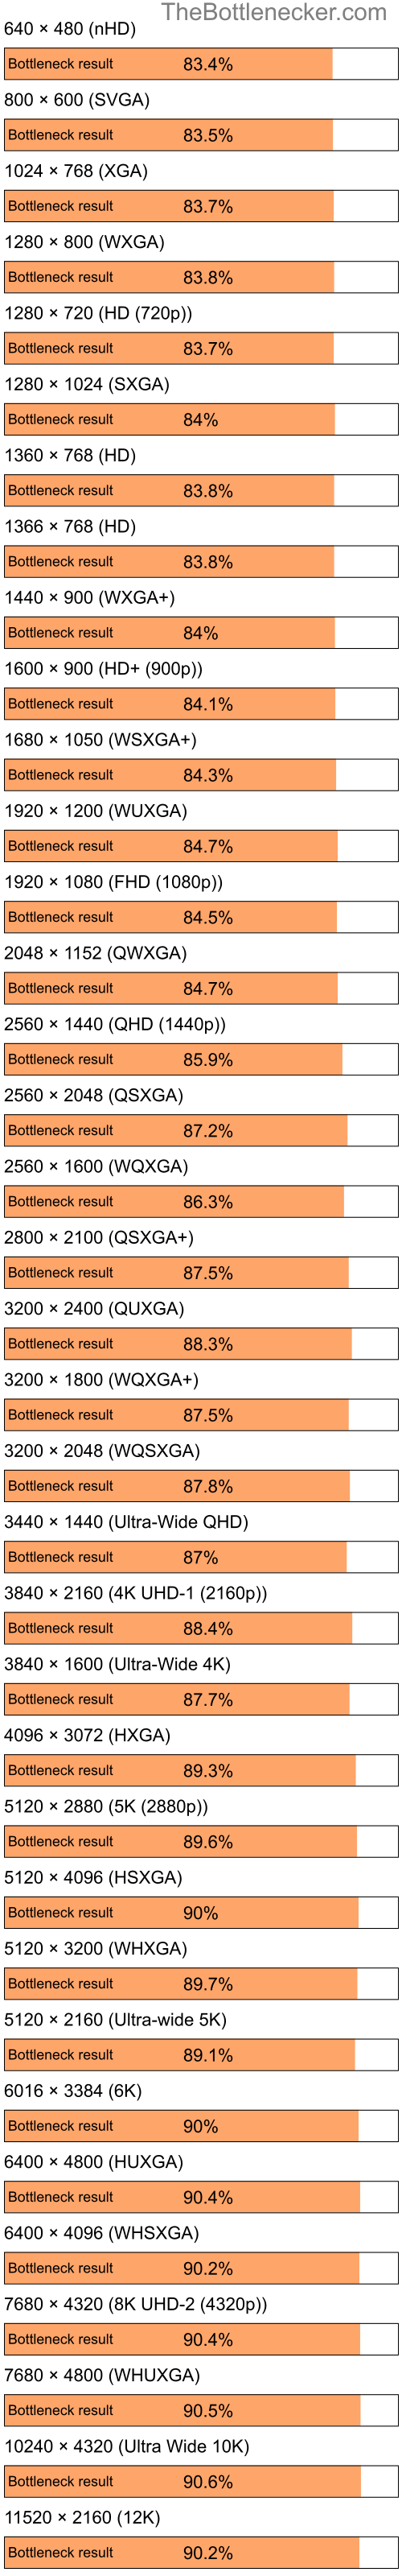 Bottleneck results by resolution for Intel Atom N280 and NVIDIA GeForce Go 6150 in7 Days to Die